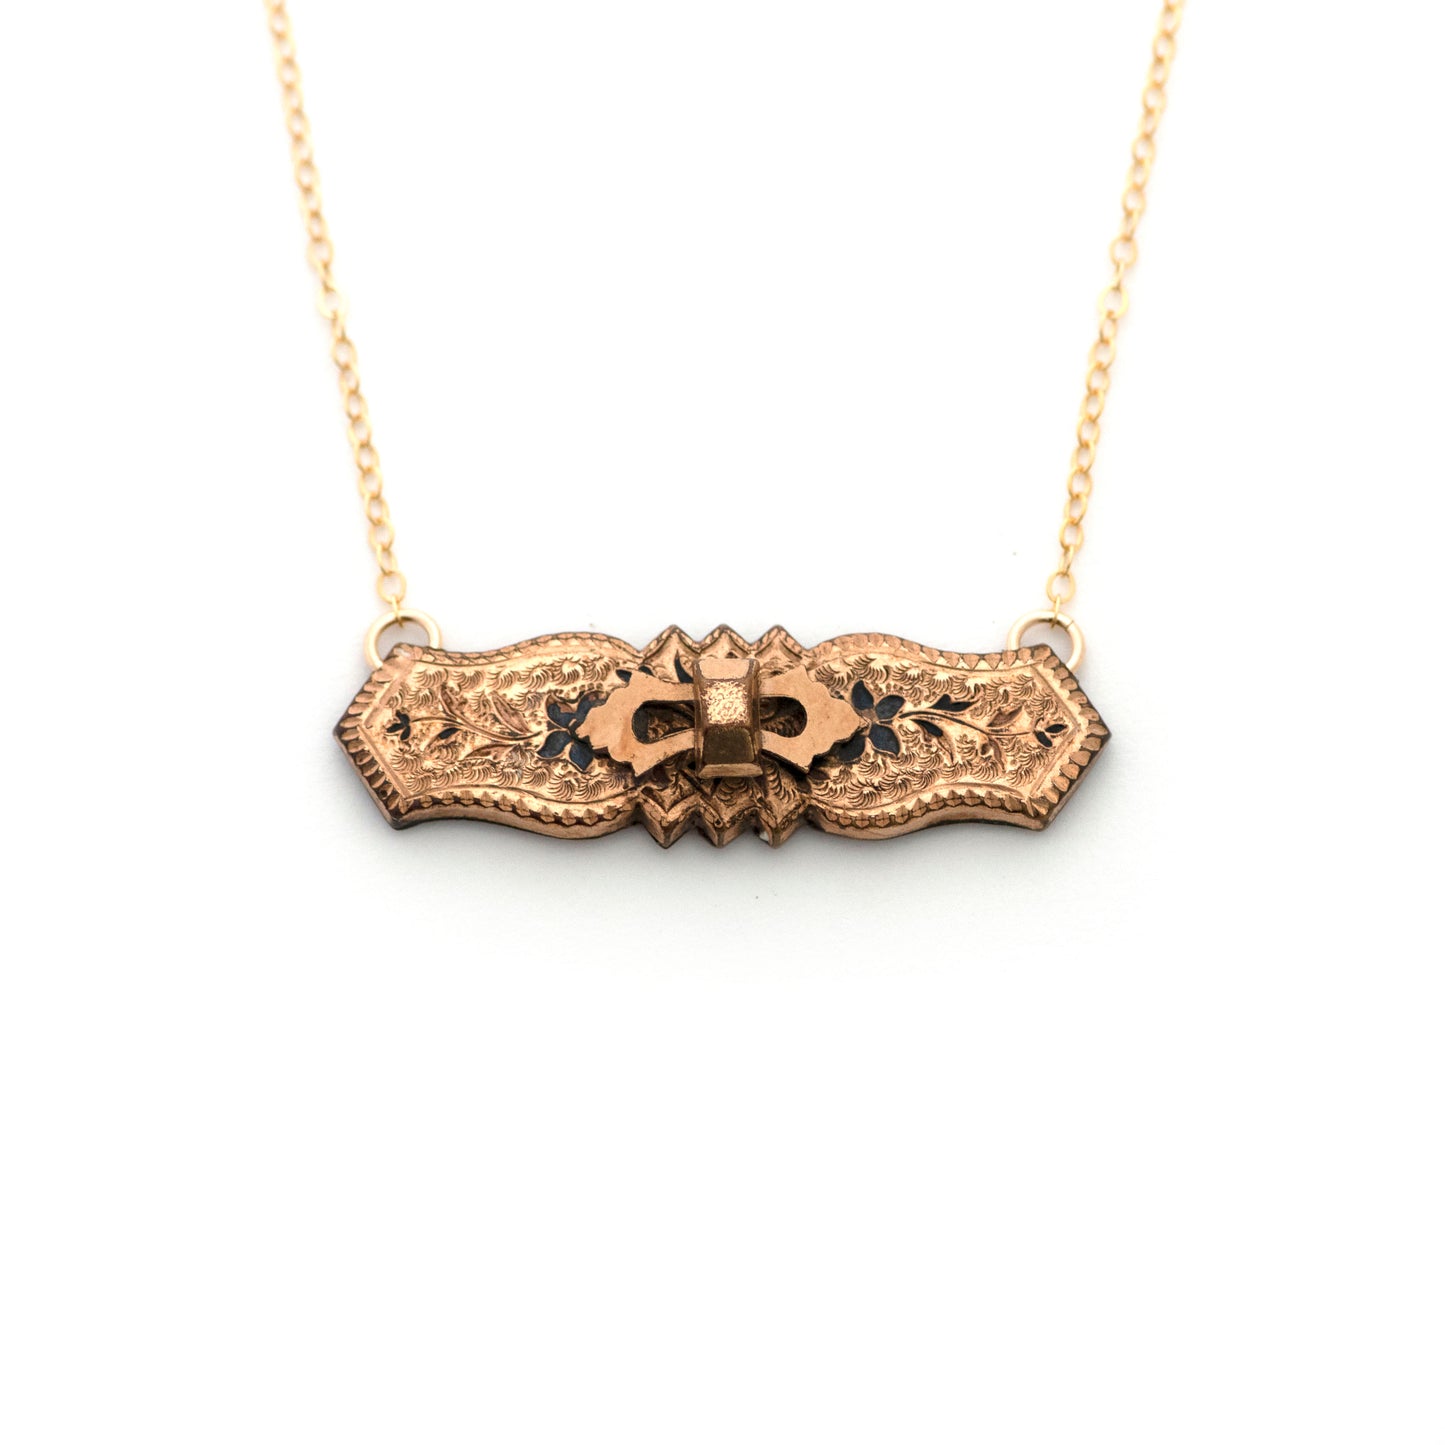 An antique necklace made from converting a Victorian bar pin into a pendant and attaching a new 14k gold filled chain.